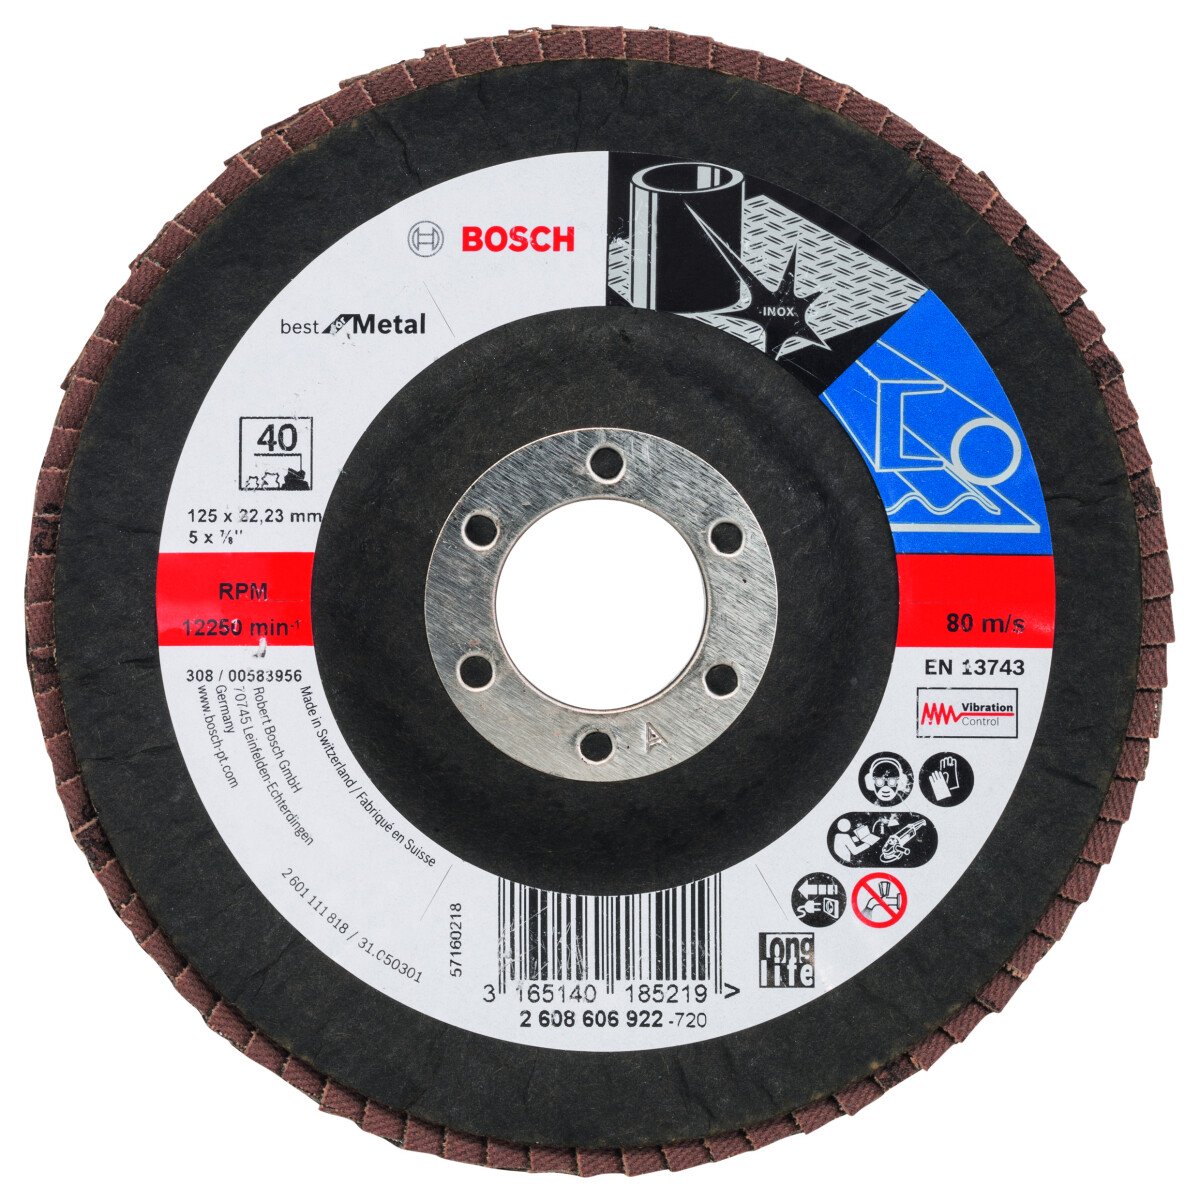 Bosch 2608606922 Flap Sanding discs for Angle Grinders . 125x22 G40